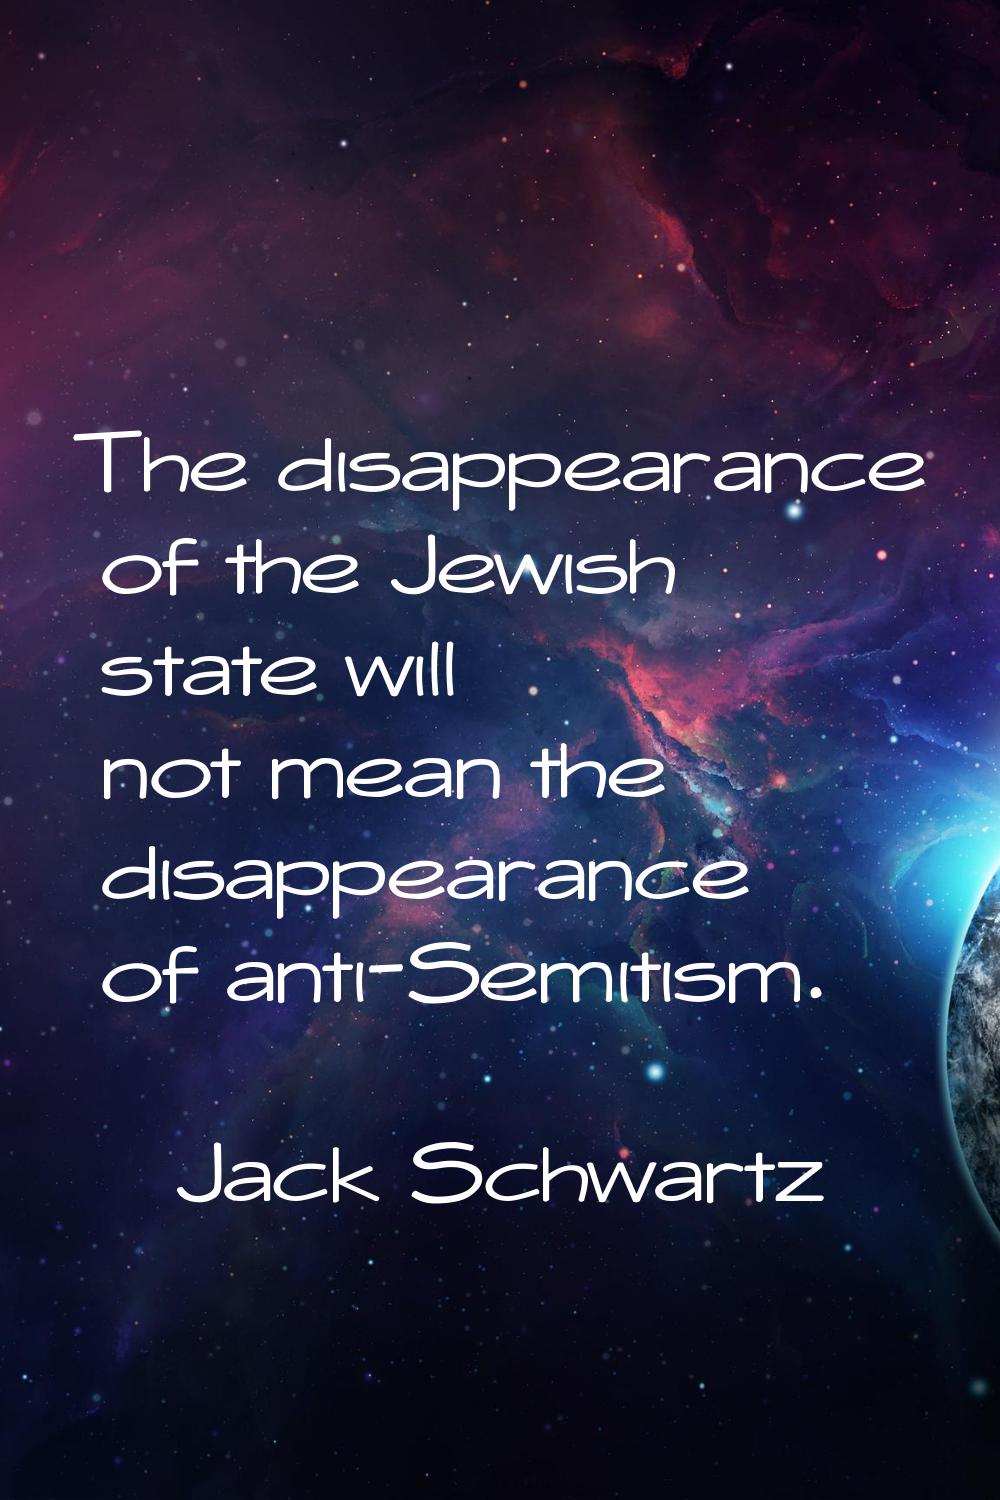 The disappearance of the Jewish state will not mean the disappearance of anti-Semitism.